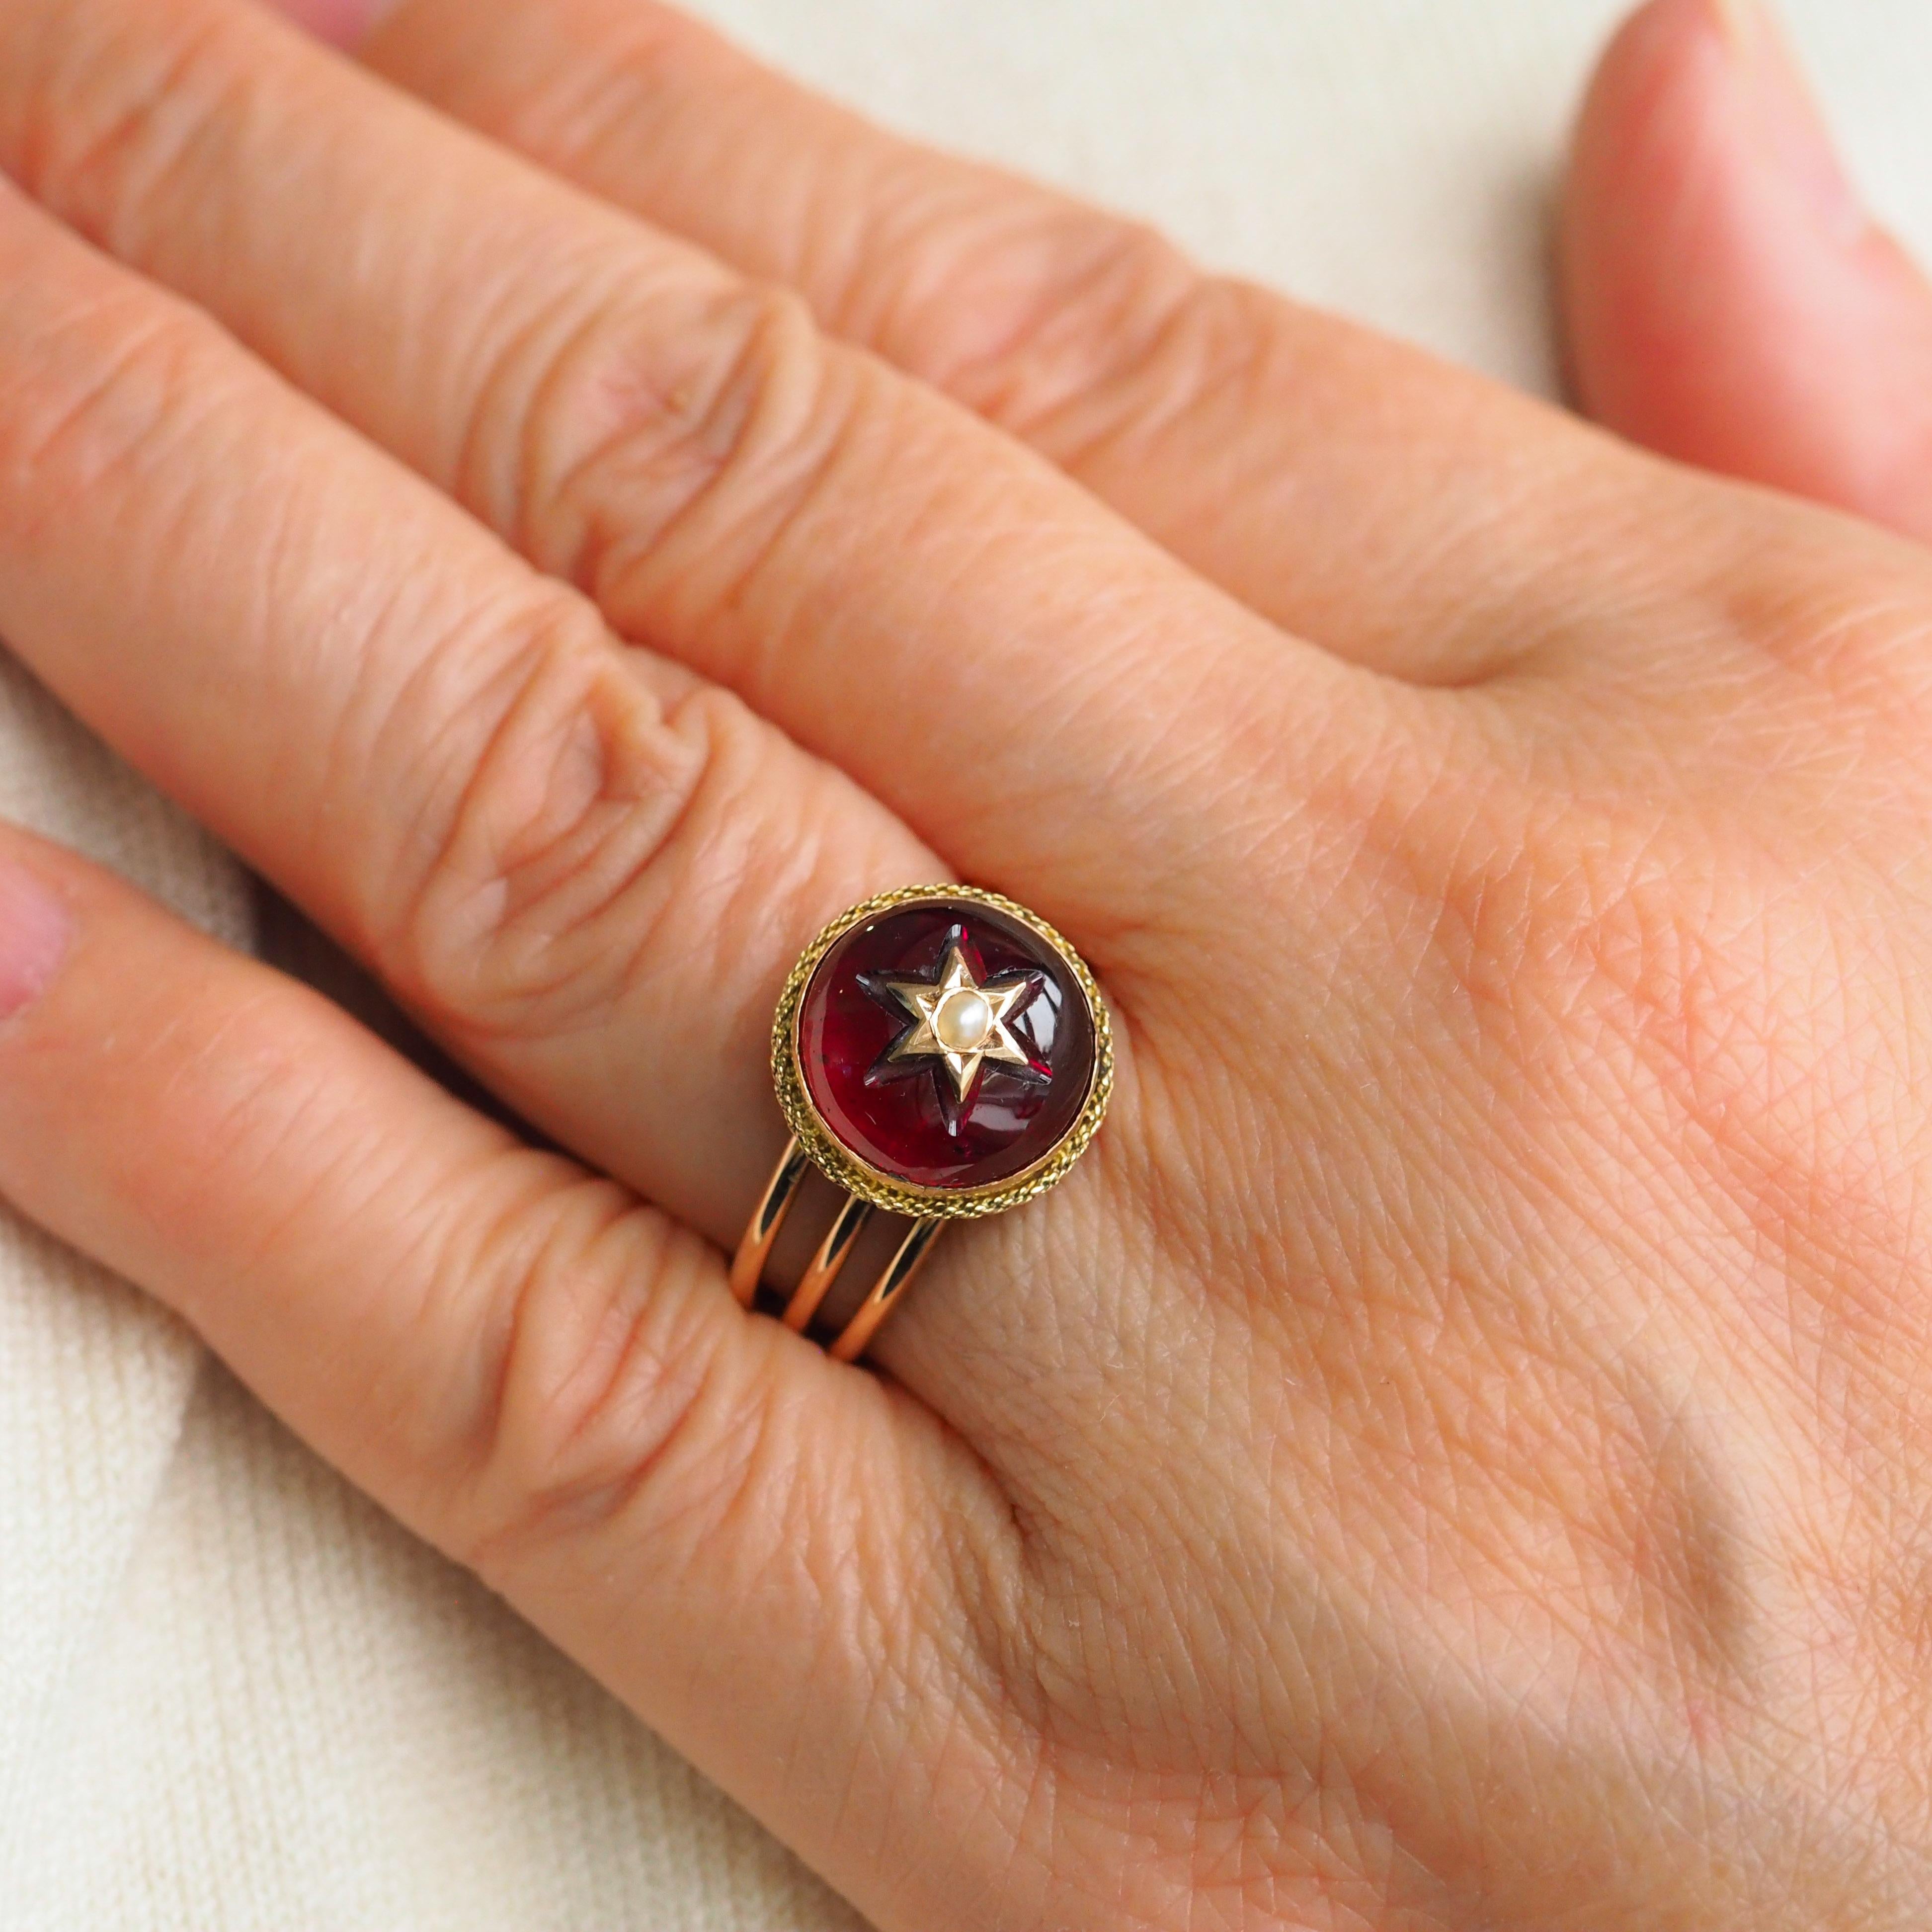 Antique Victorian 14K Gold Garnet Star Cabochon Ring with Seed Pearl - c.1880 For Sale 7